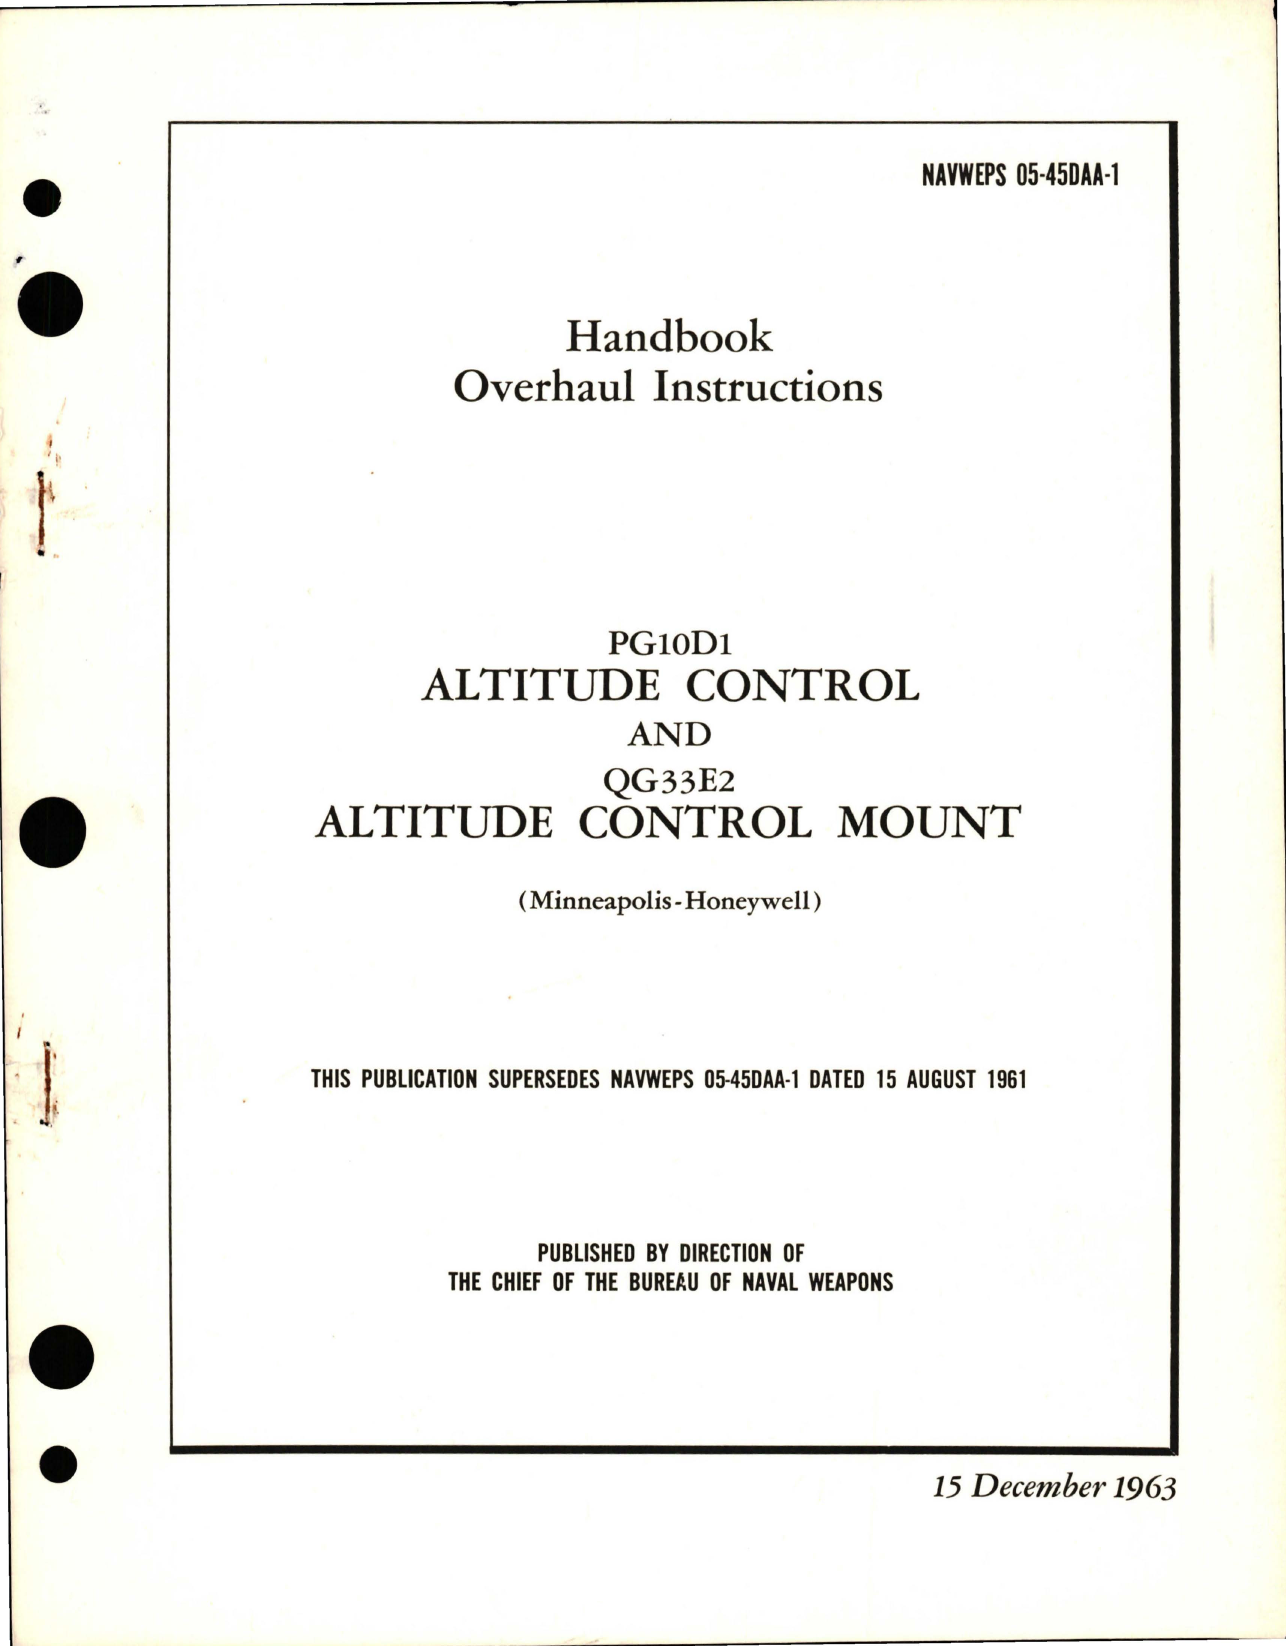 Sample page 1 from AirCorps Library document: Overhaul Instructions for Altitude Control - PG10D1 and Altitude Control Mount - QG33E2